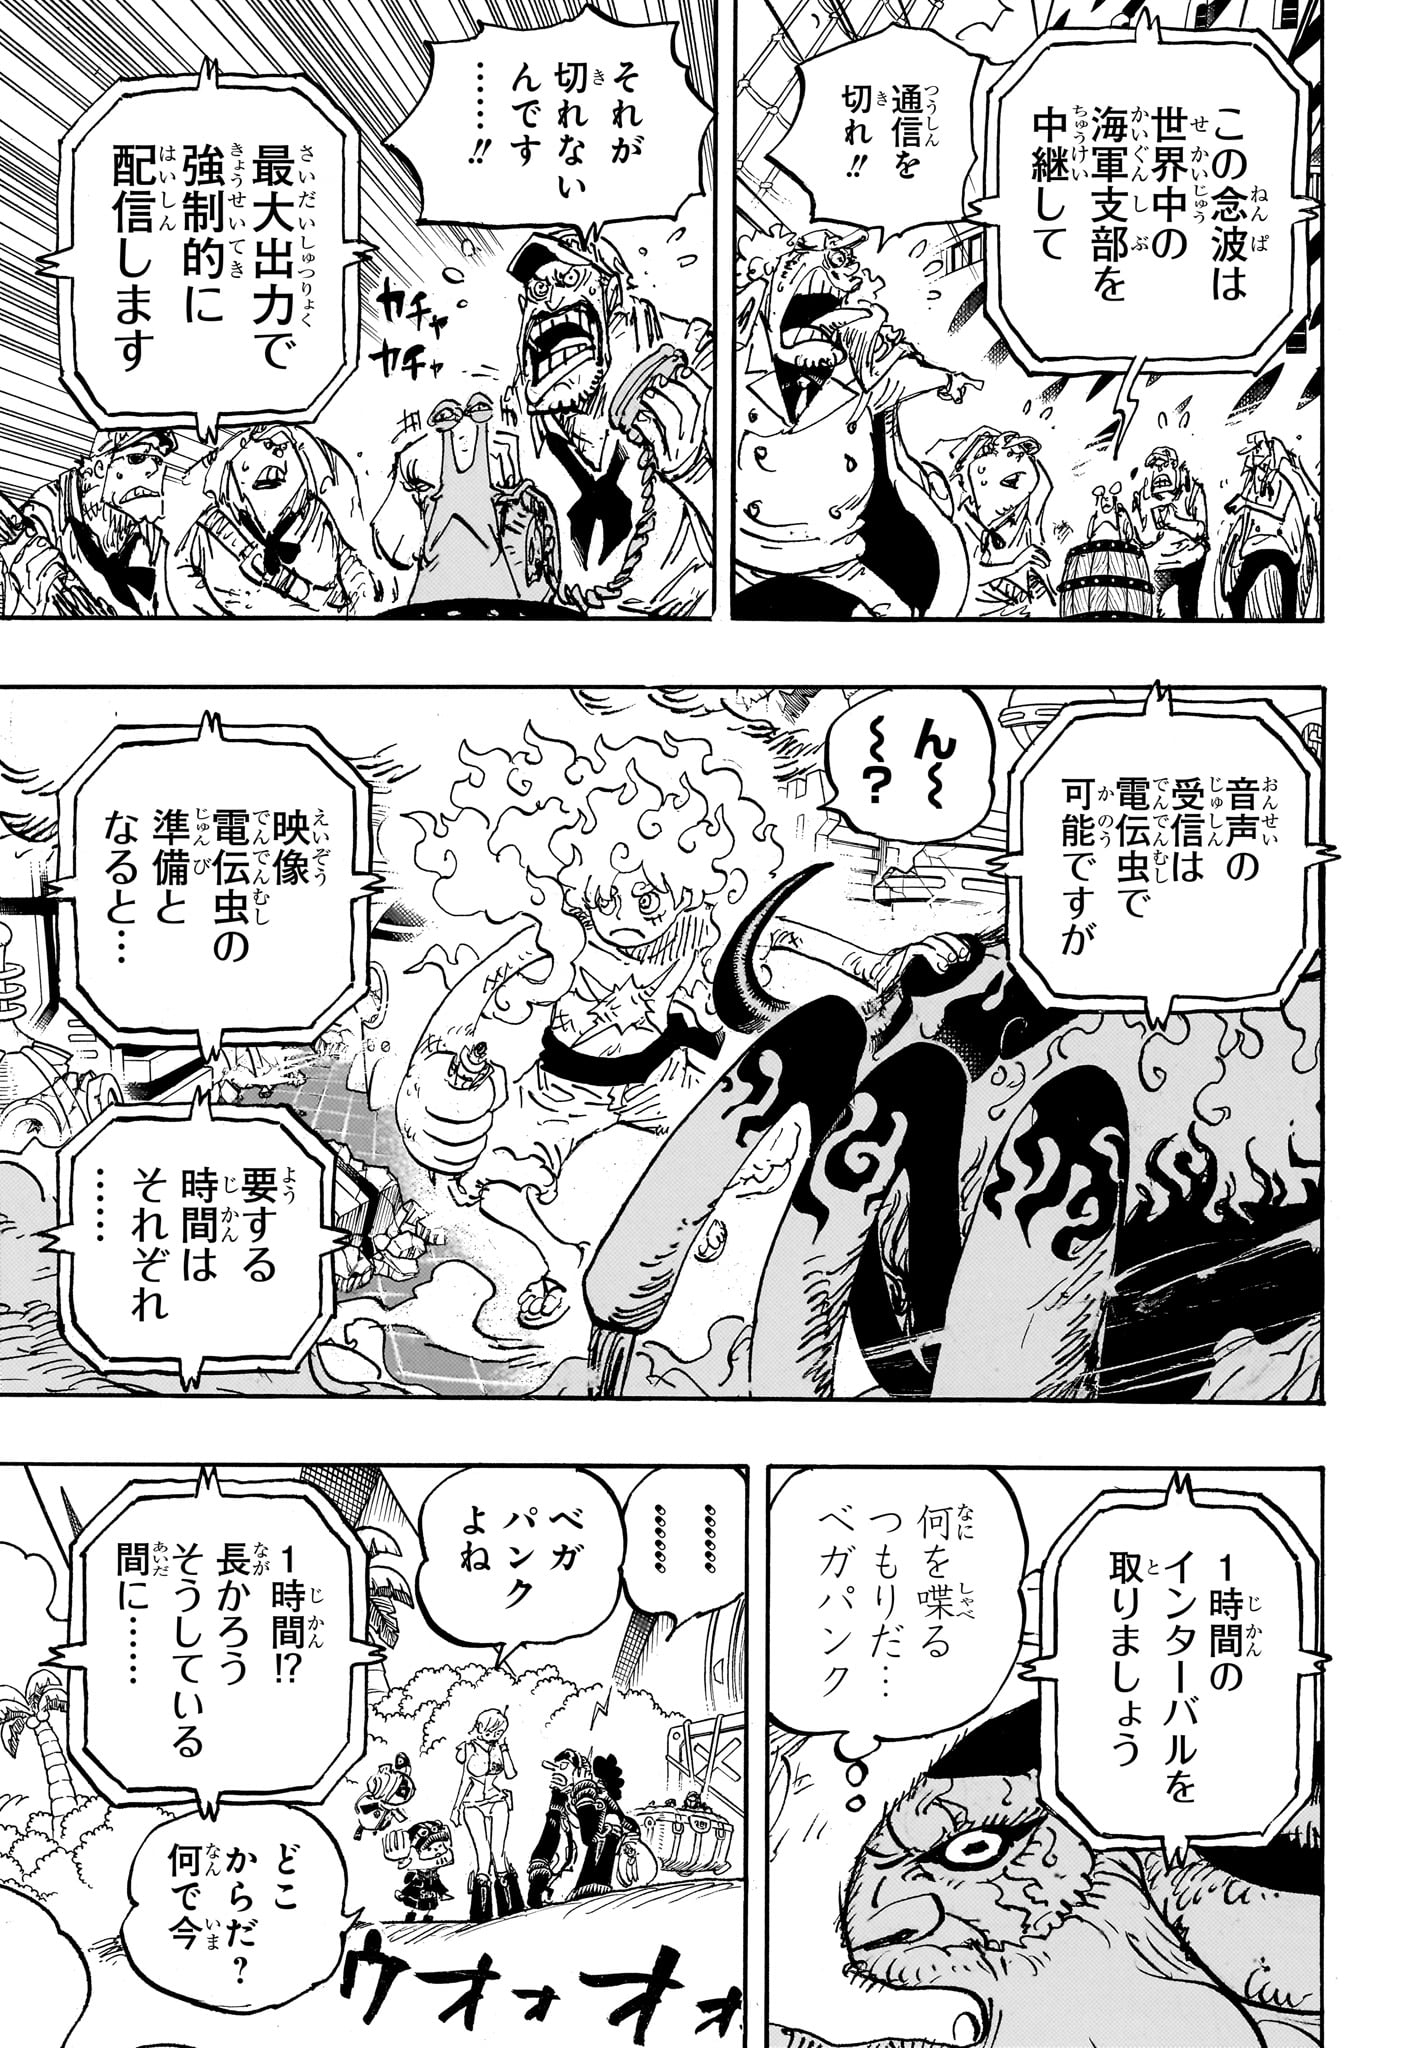 One Piece - Chapter 1109 - Page 3